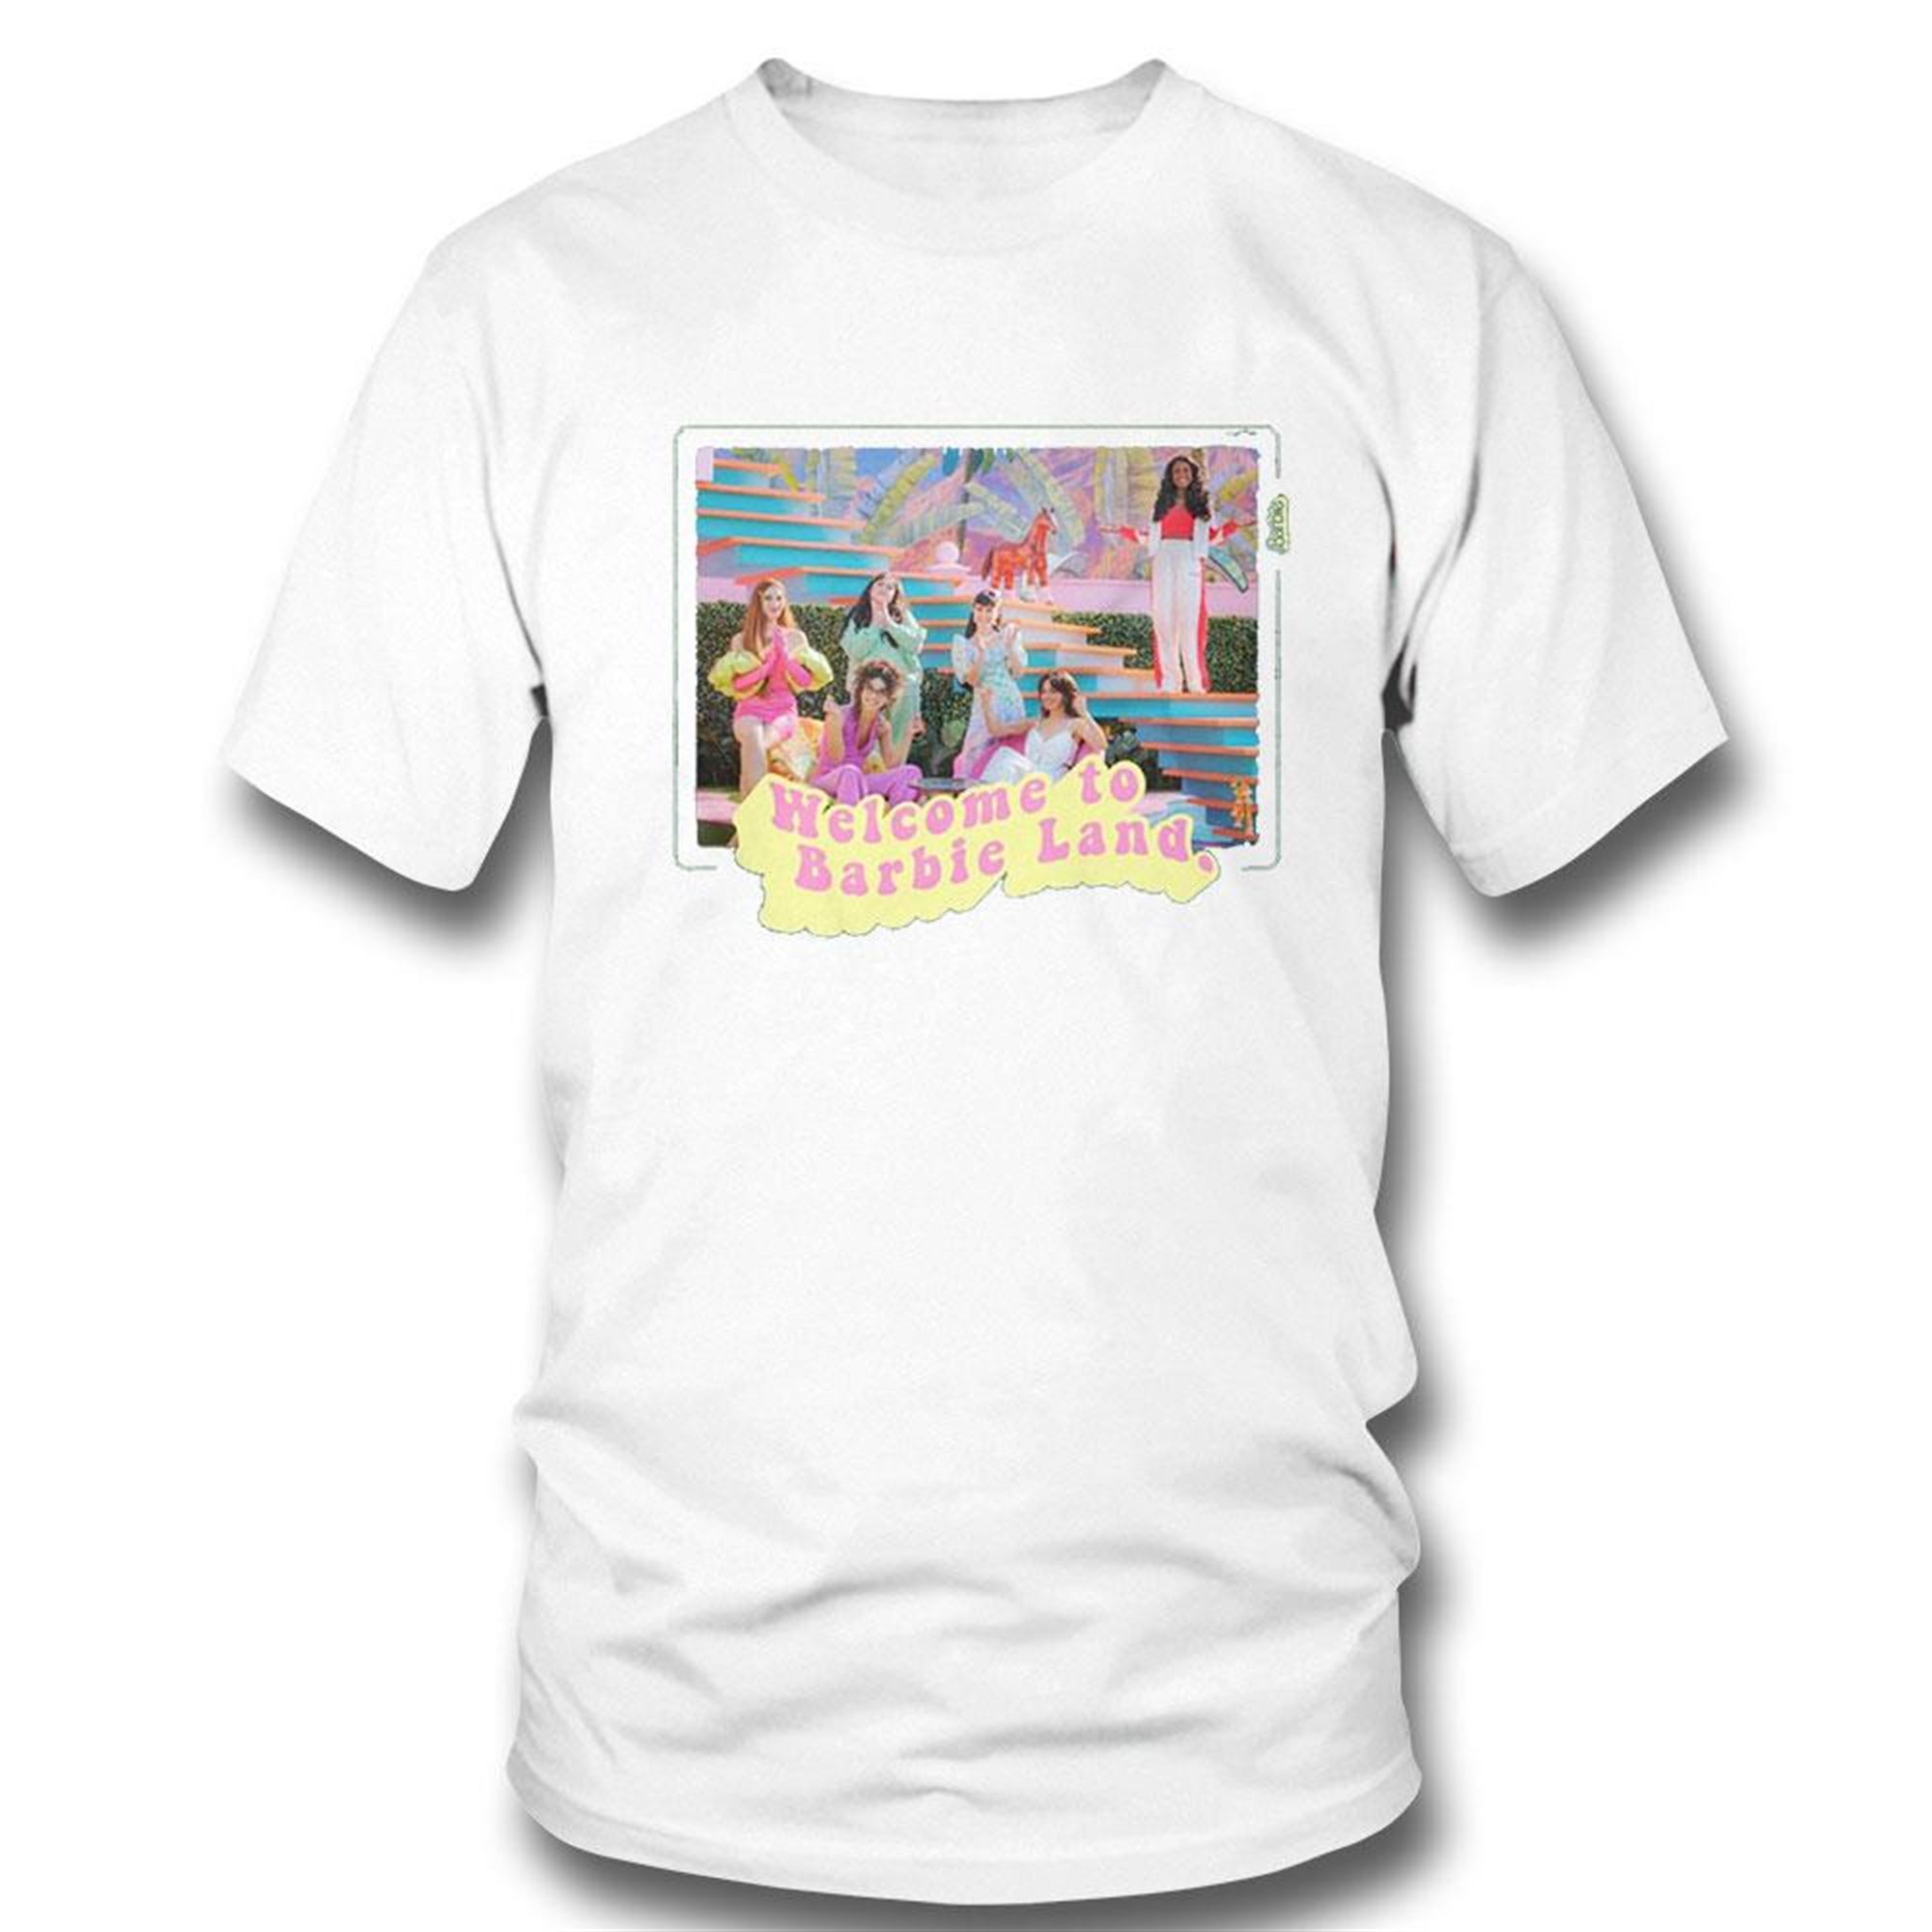 Welcome To Barbie Land T-shirt